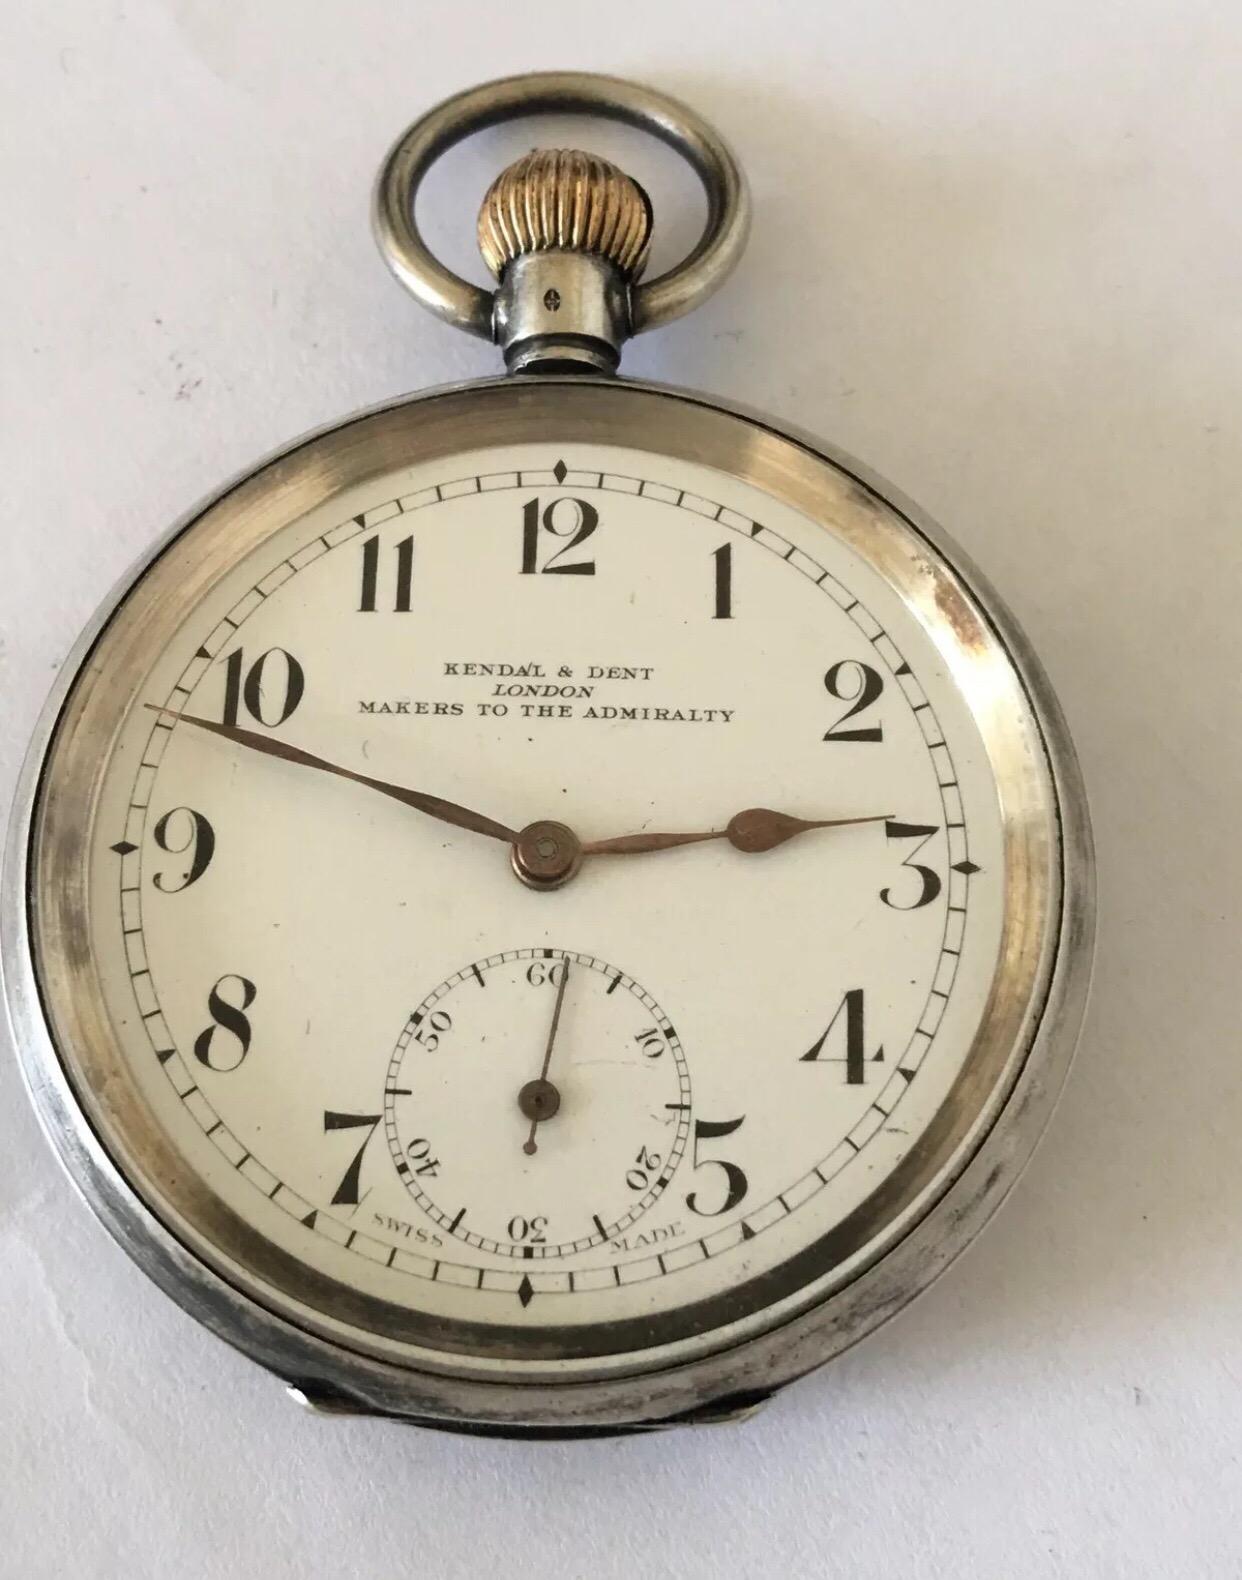 Antique Silver Swiss Made Pocket Watch Signed Kendal and Dent London 1